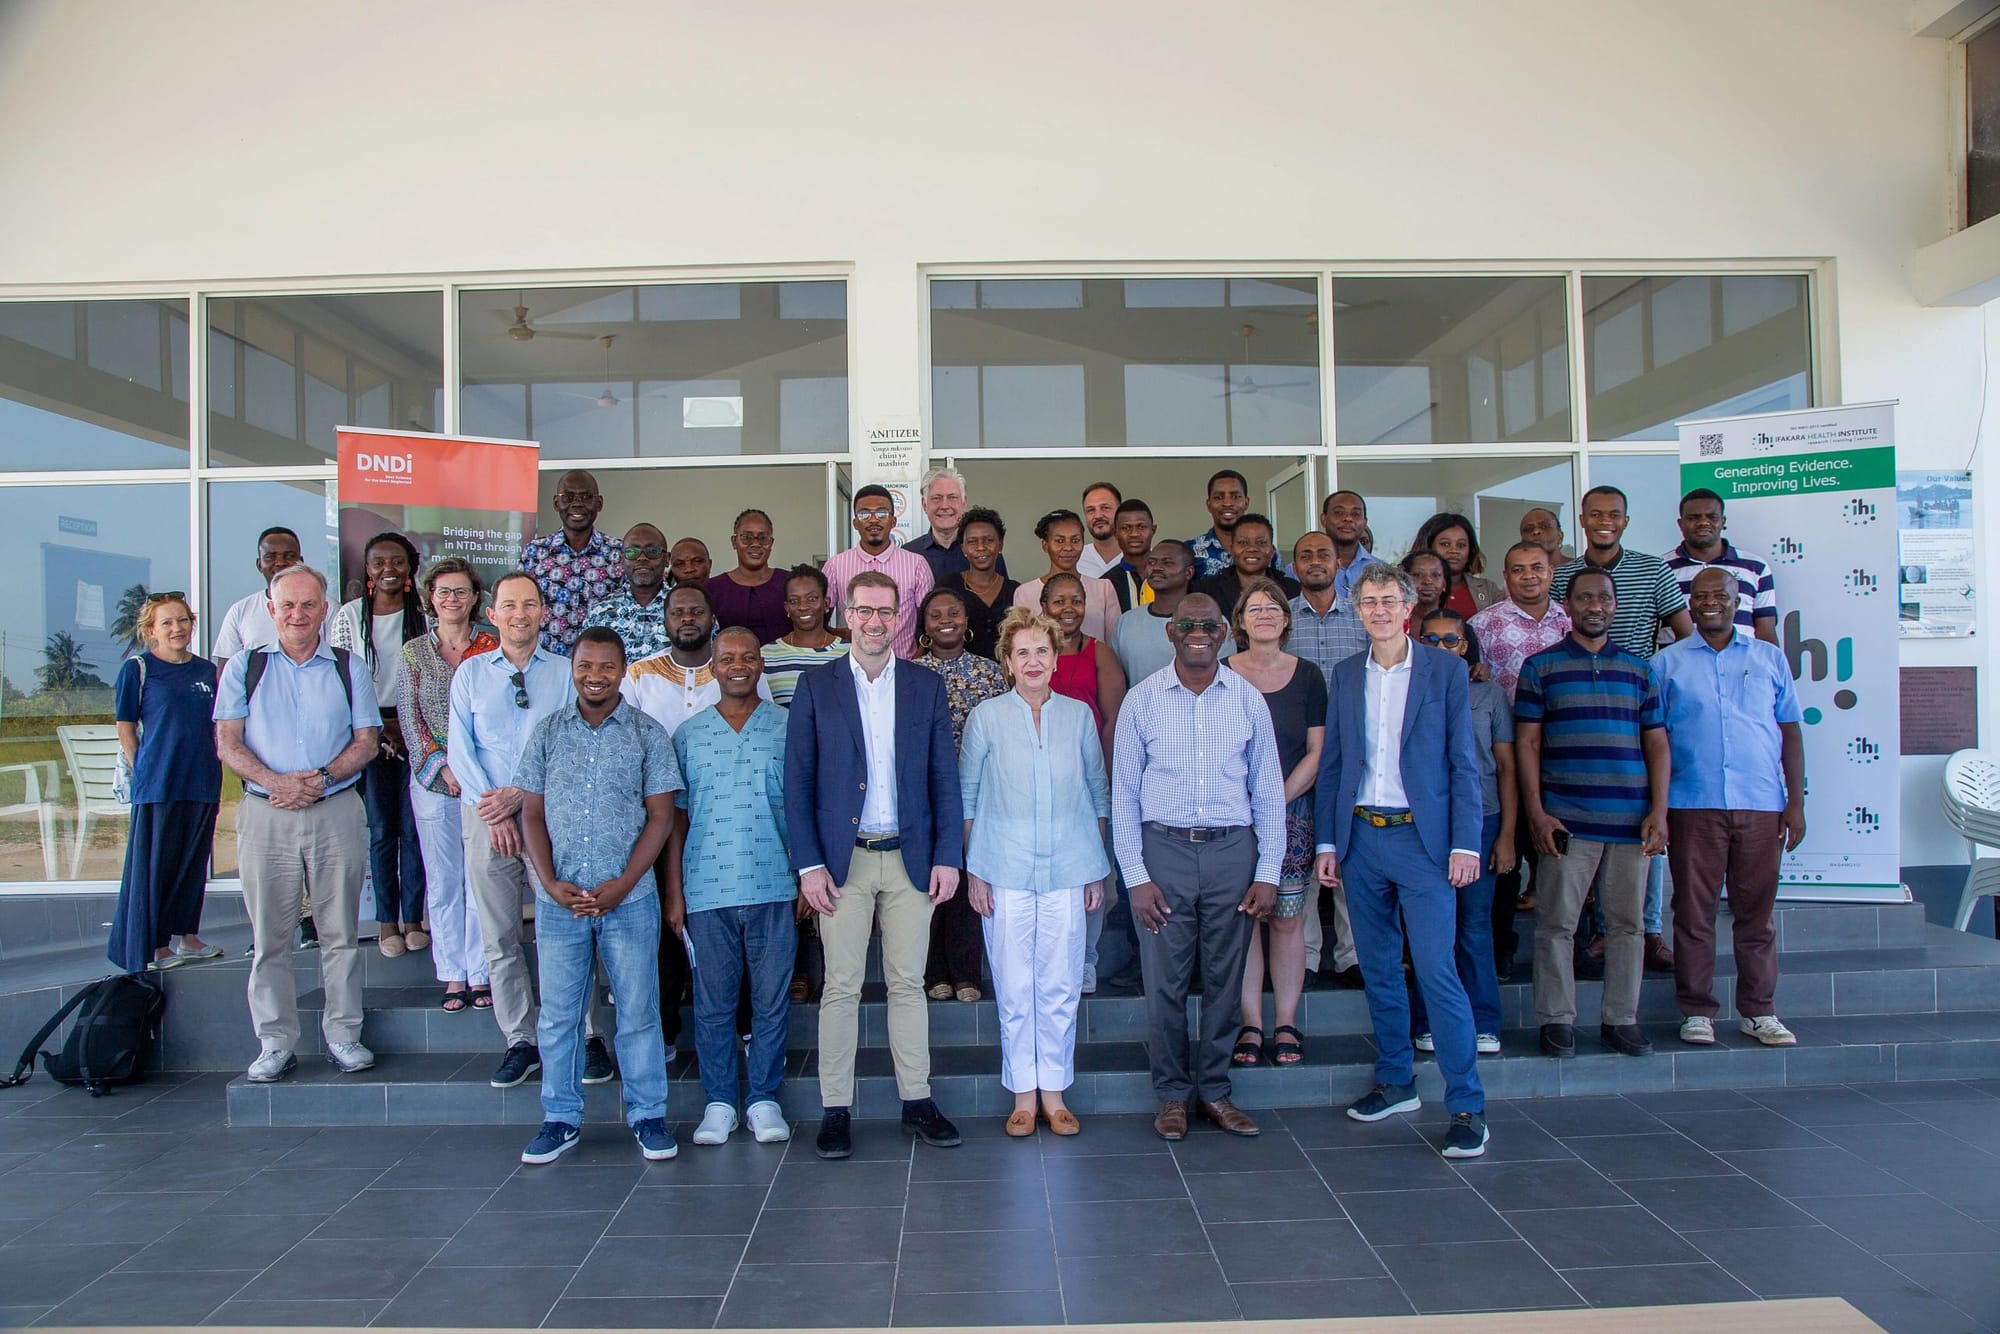 Group photo of participants from workshop